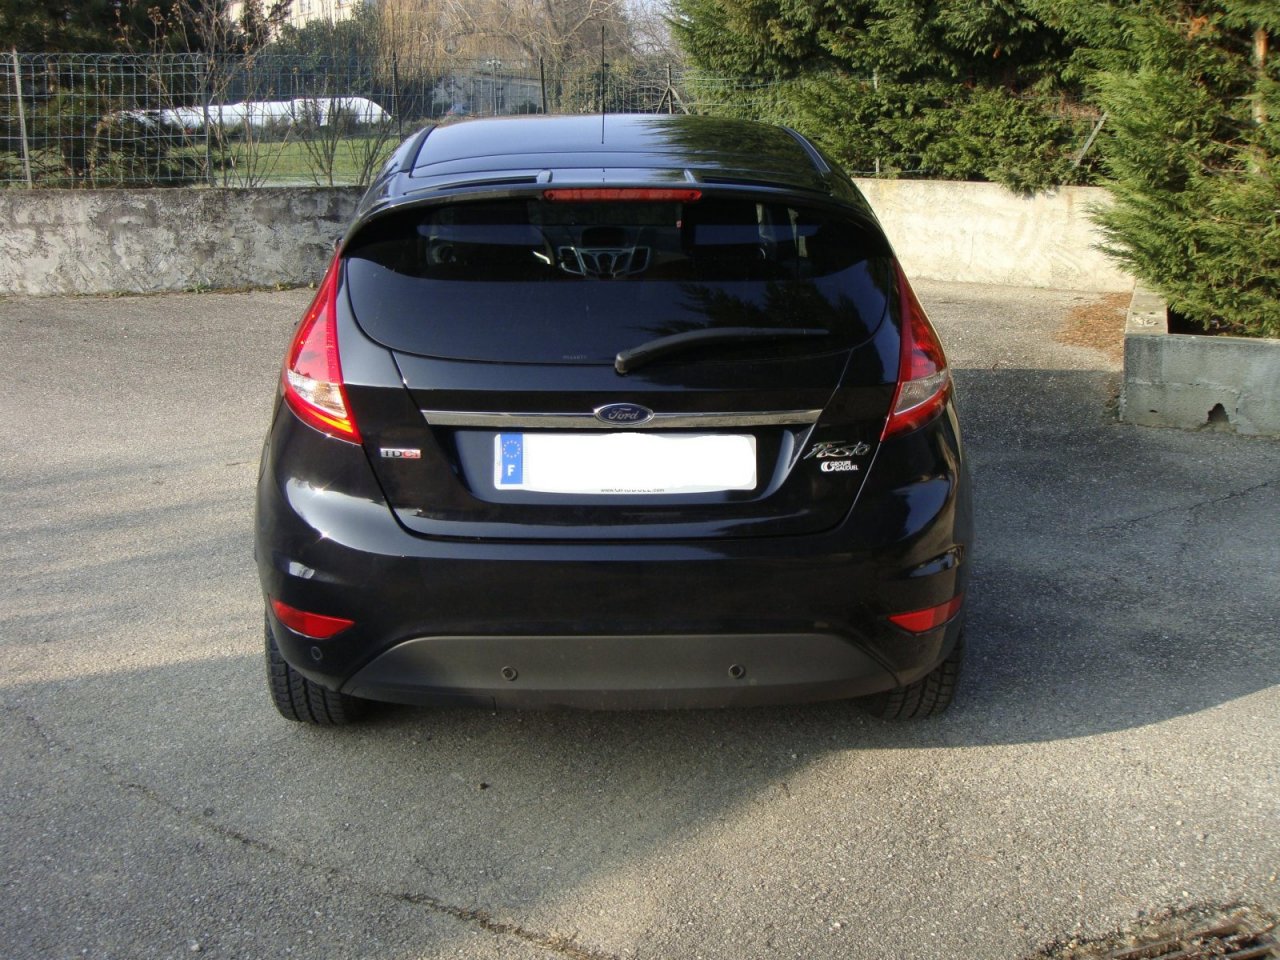 Topic Officiel] Ford Fiesta V (2002-2008) - Page 519 - Fiesta - Ford -  Forum Marques Automobile - Forum Auto